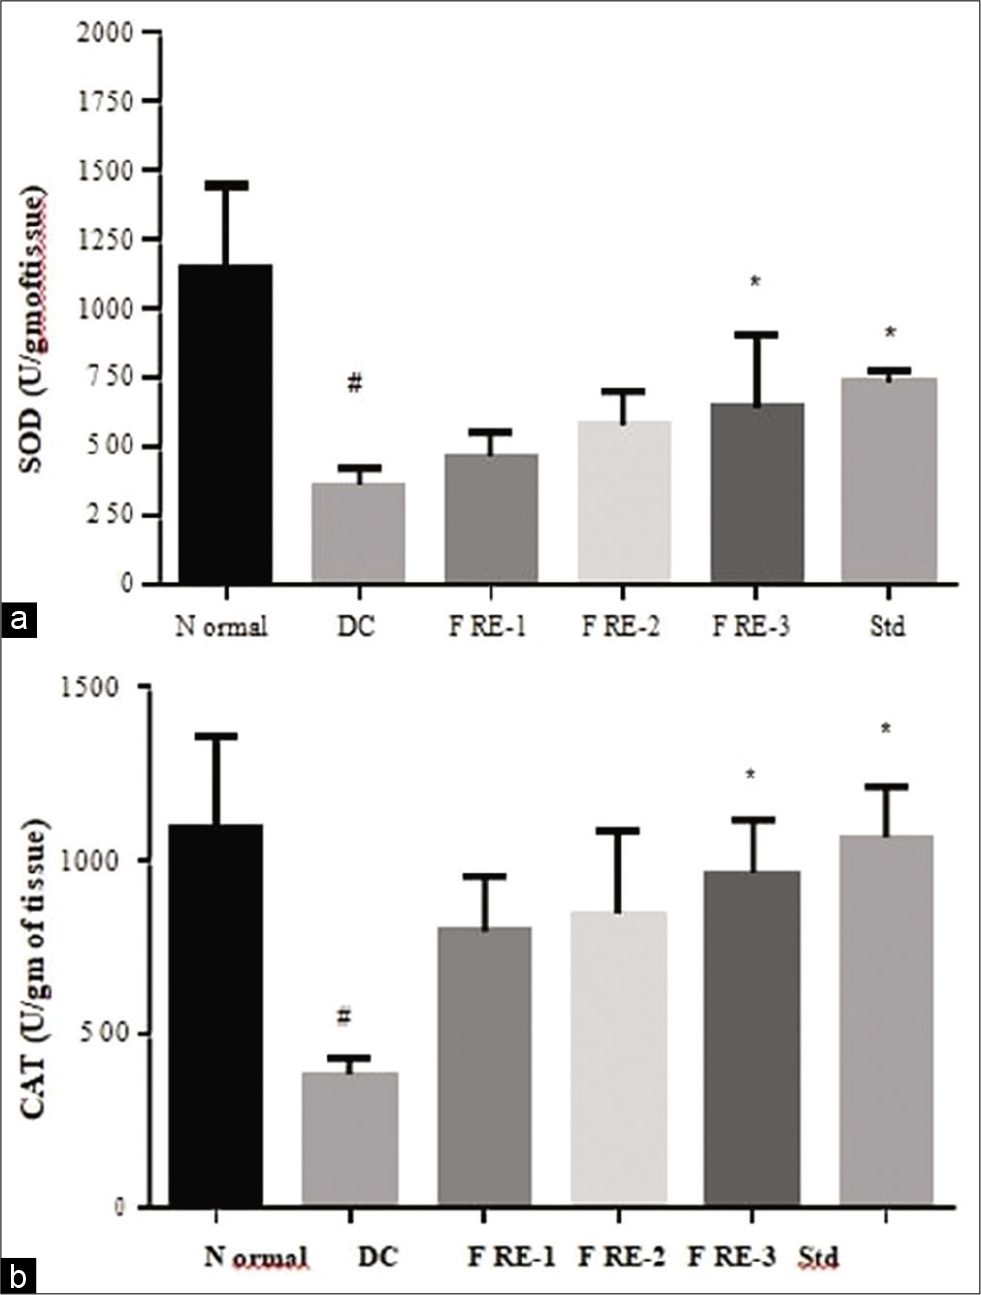 Effects of methanolic extract of Ficus racemosa (FRM) on Superoxide Dismutase (a) and Catalase (b) level in rat liver DC= disease control; FRE-1= 100mg/kg; FRE-2= 200mg/kg; FRE- 3= 400mg/kg; Std= 20mg/kg Atorvastatin #Significantly different from normal control group, P < 0.05; *Significantly different from disease control group, P < 0.05.